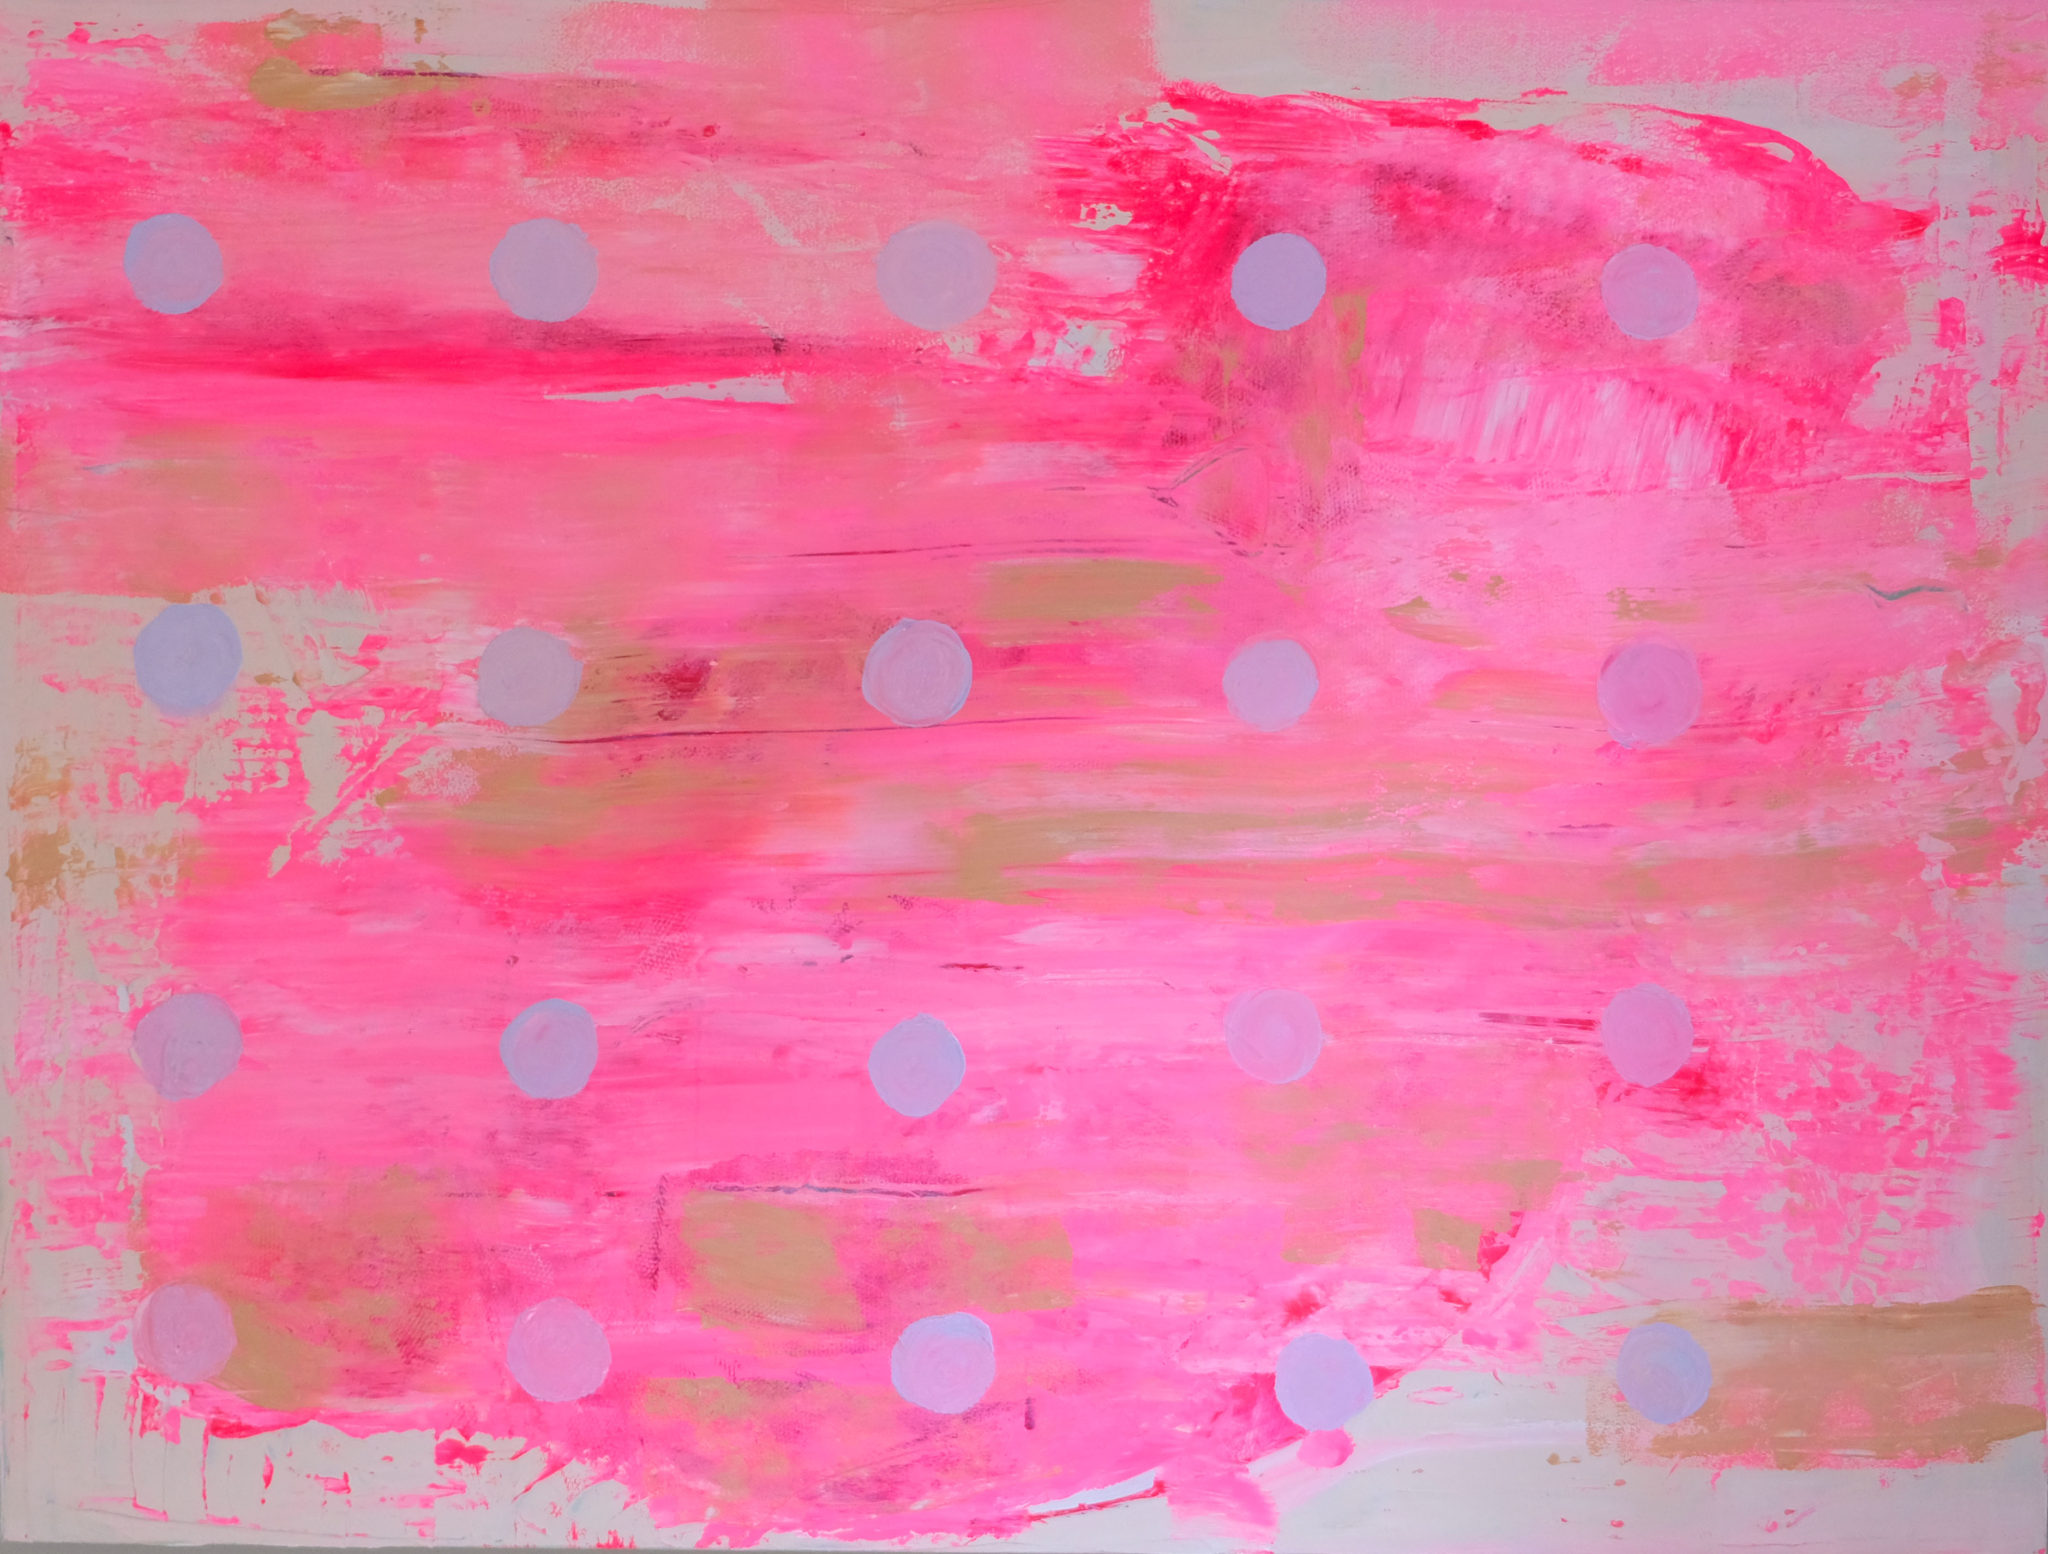 Name is Baby is an original piece from Caitlin Wheeler's private collection featuring neon pinks, taupe, tan, and periwinkle acrylic on canvas